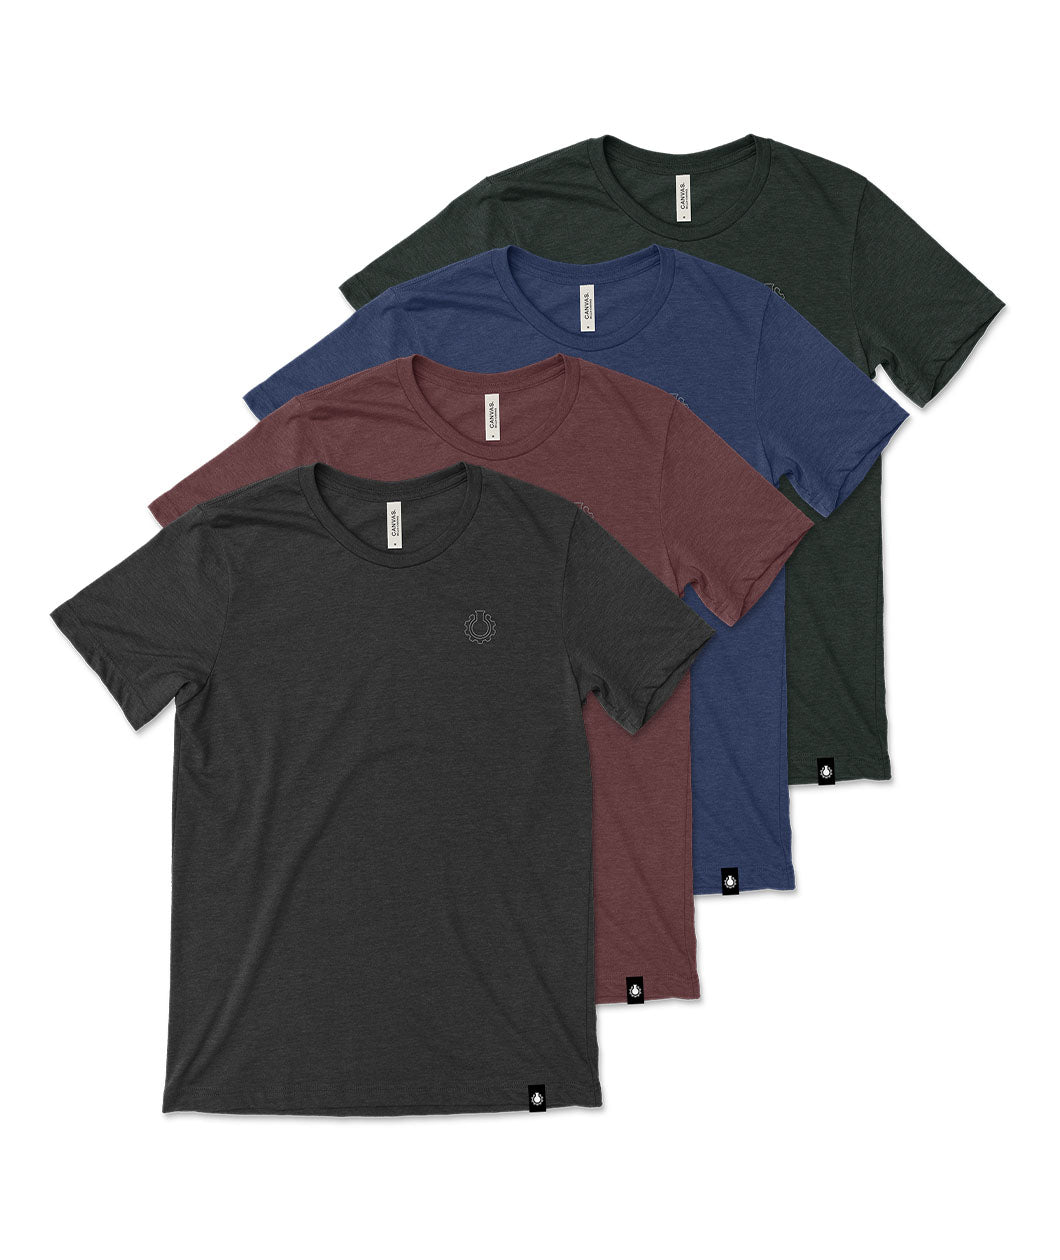 Four shirts lined up together, one dark green, one dark blue, one dark red and one grey. Each has a subtle beaker logo from CGP Grey. 